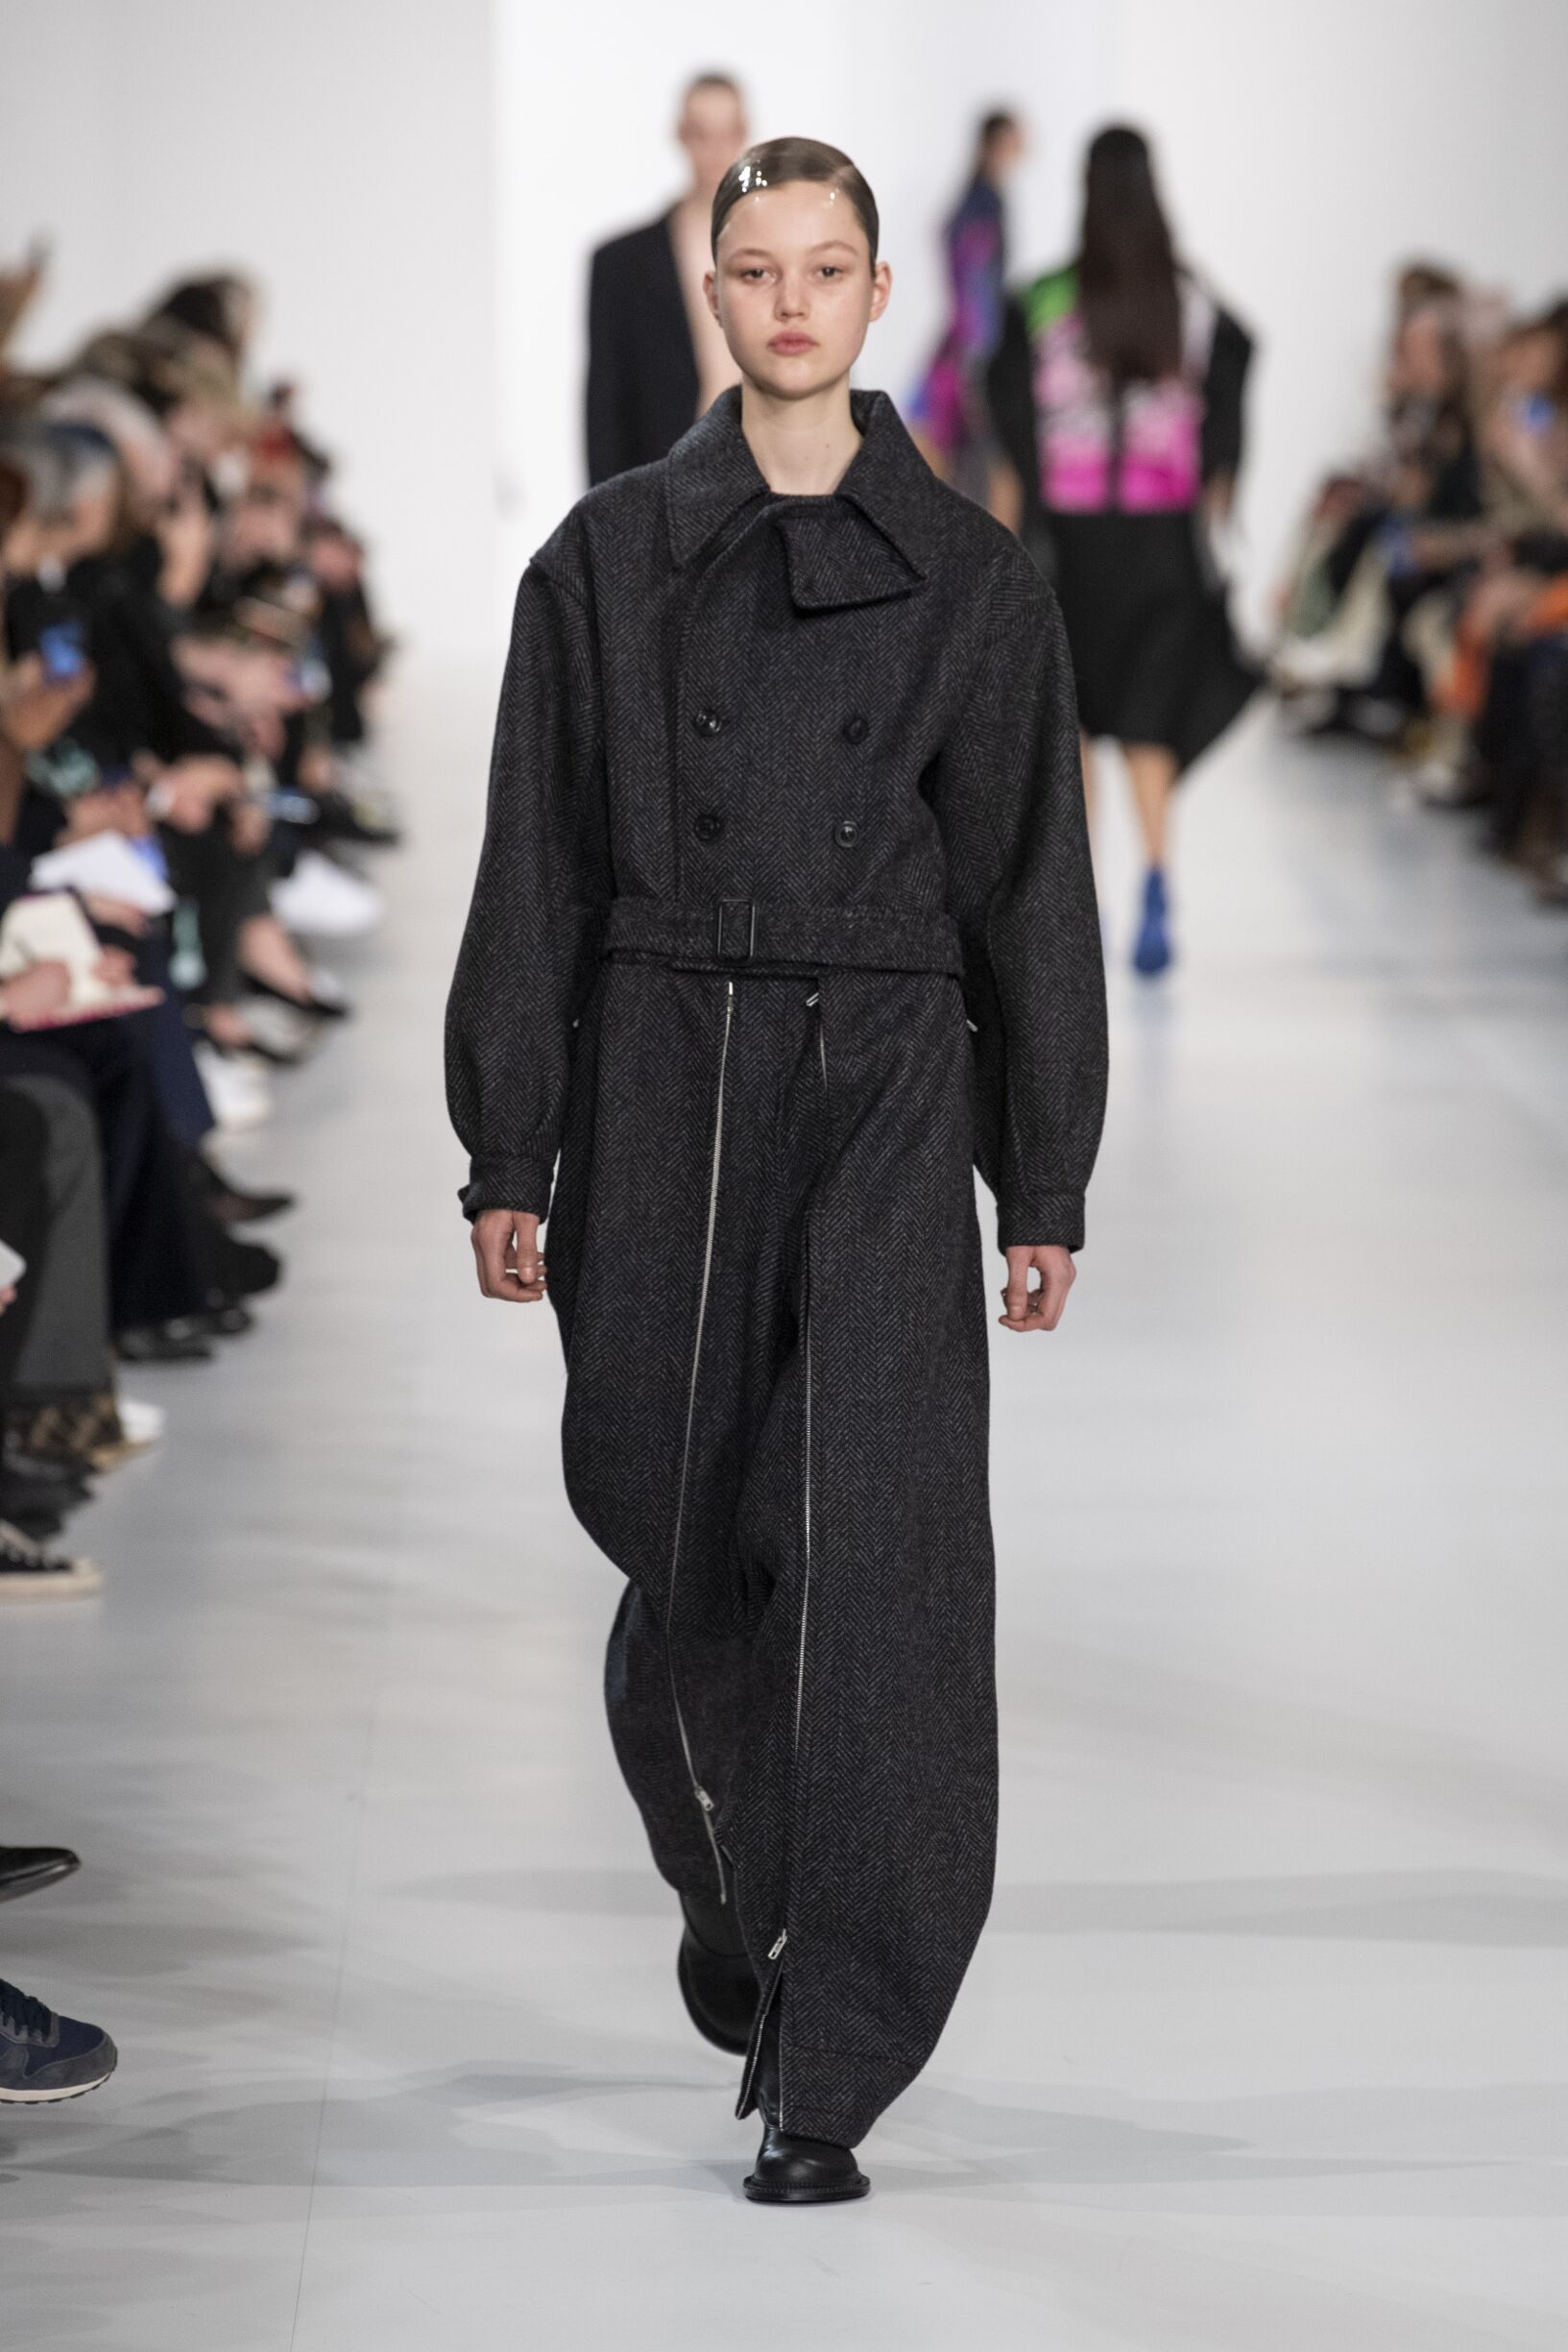 MAISON MARGIELA FALL WINTER 2019 COLLECTION | The Skinny Beep